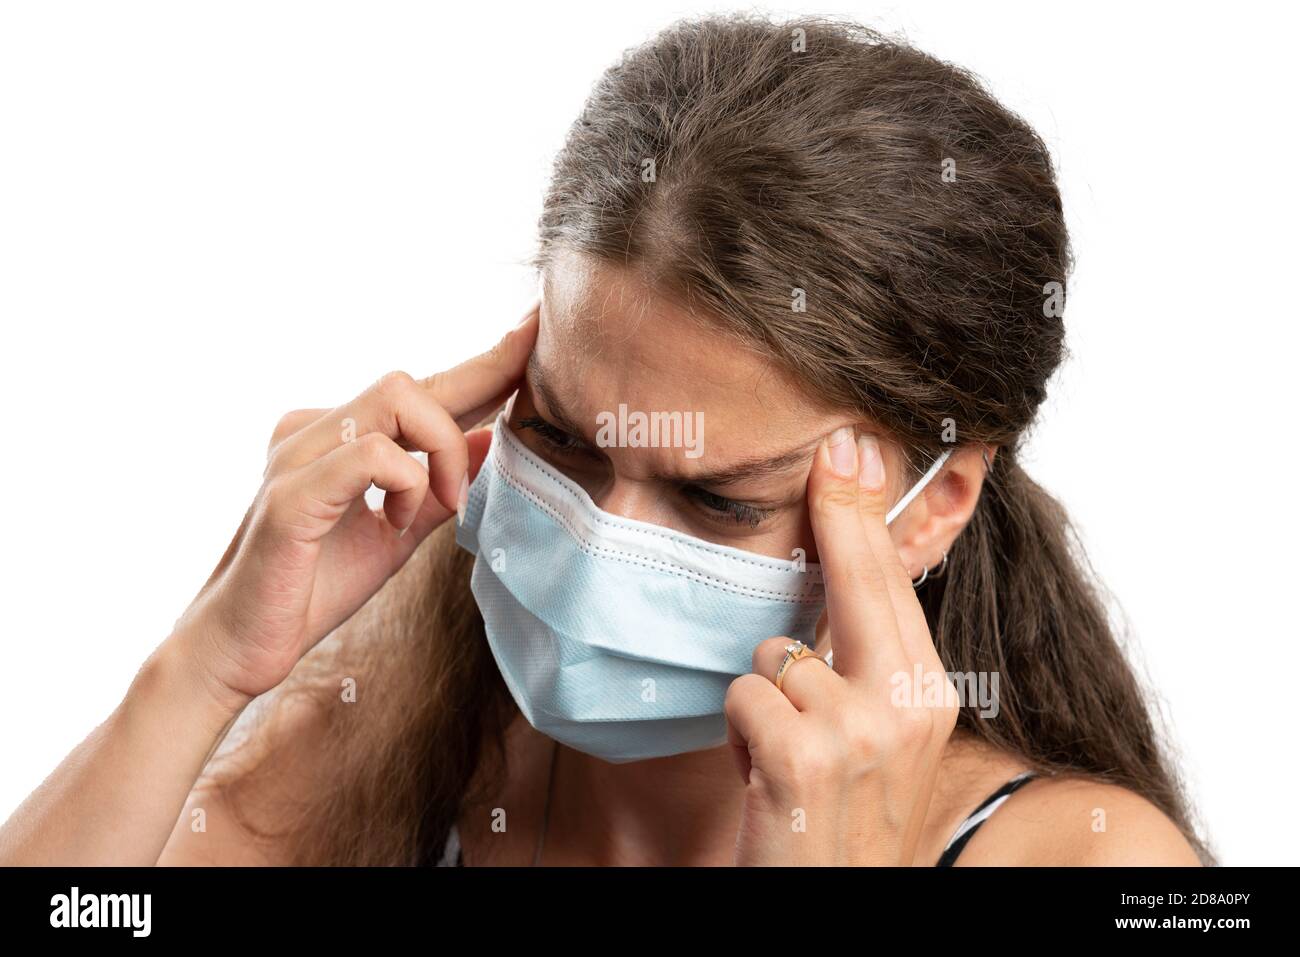 Hurting adult female model touching temples forehead as headache migraine gesture wearing surgical or medical mask as cold flu covid19 symptom concept Stock Photo